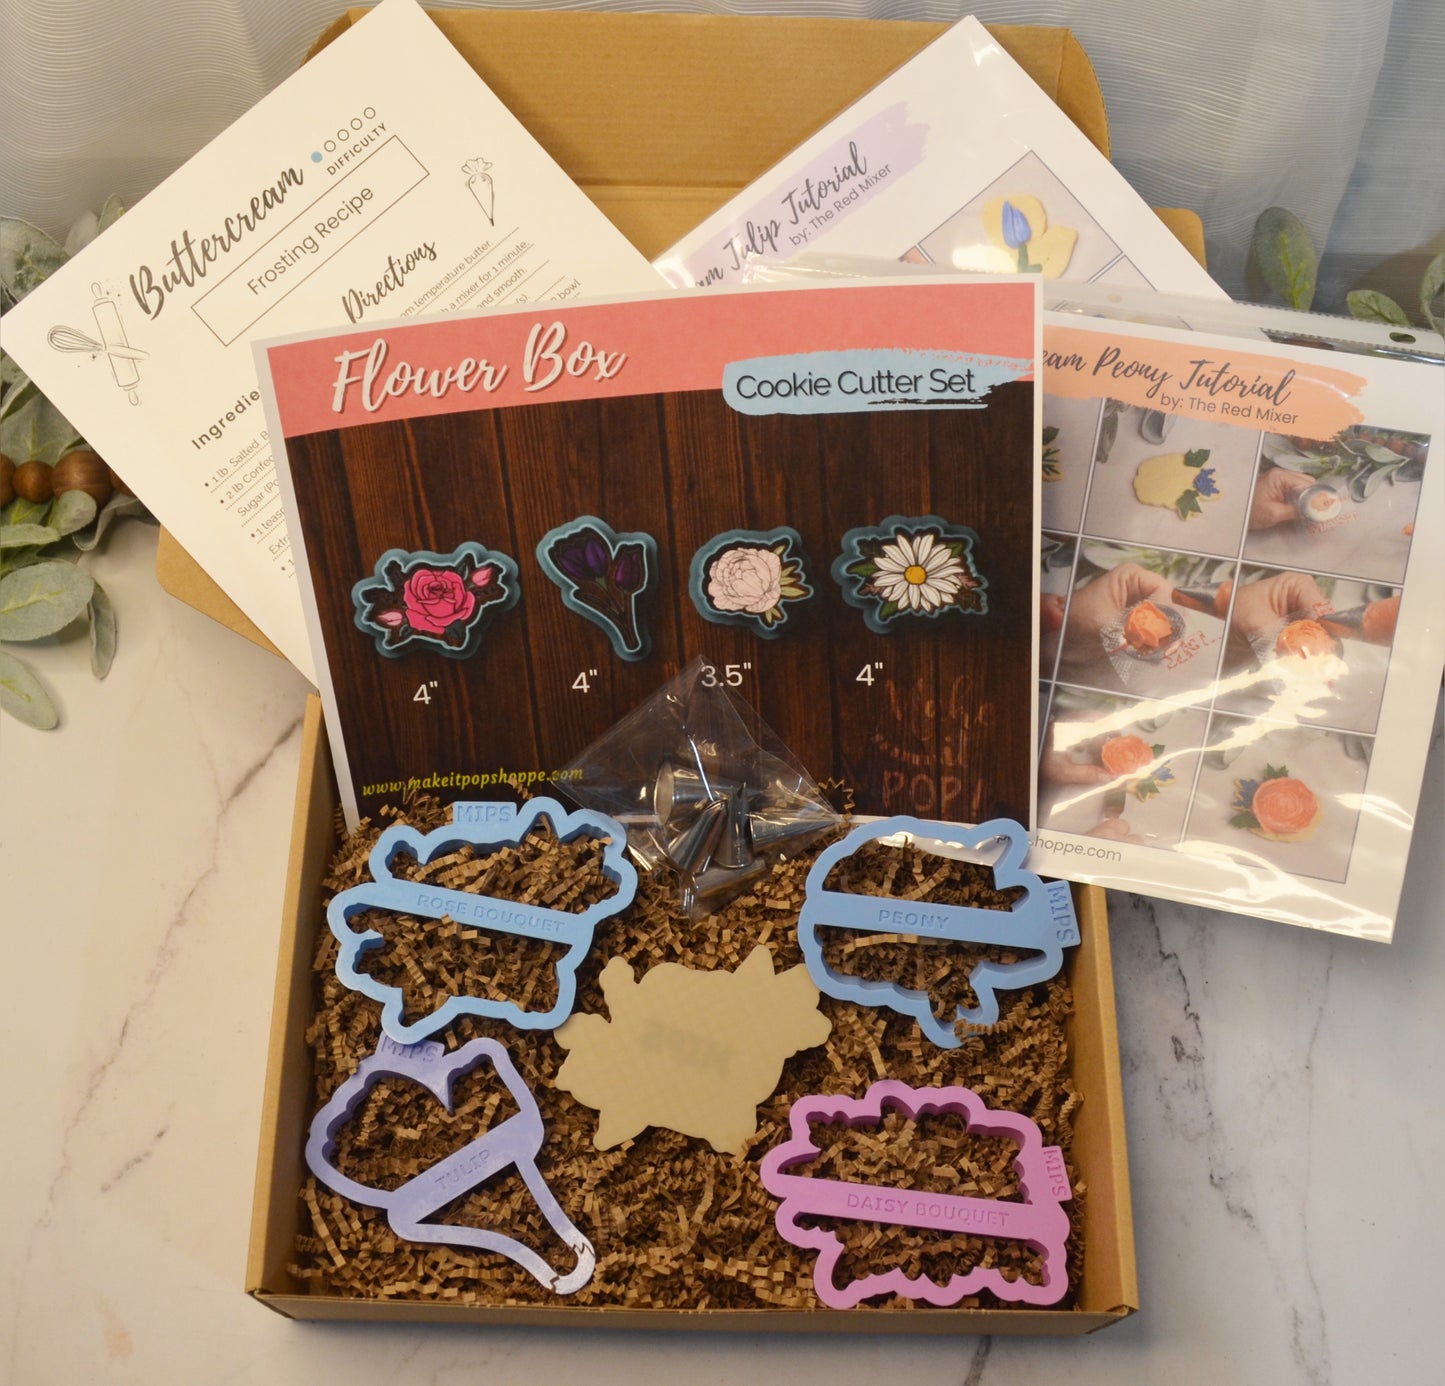 Cookie POP! - Cookie Cutter Subscription Box Membership (Quarterly)